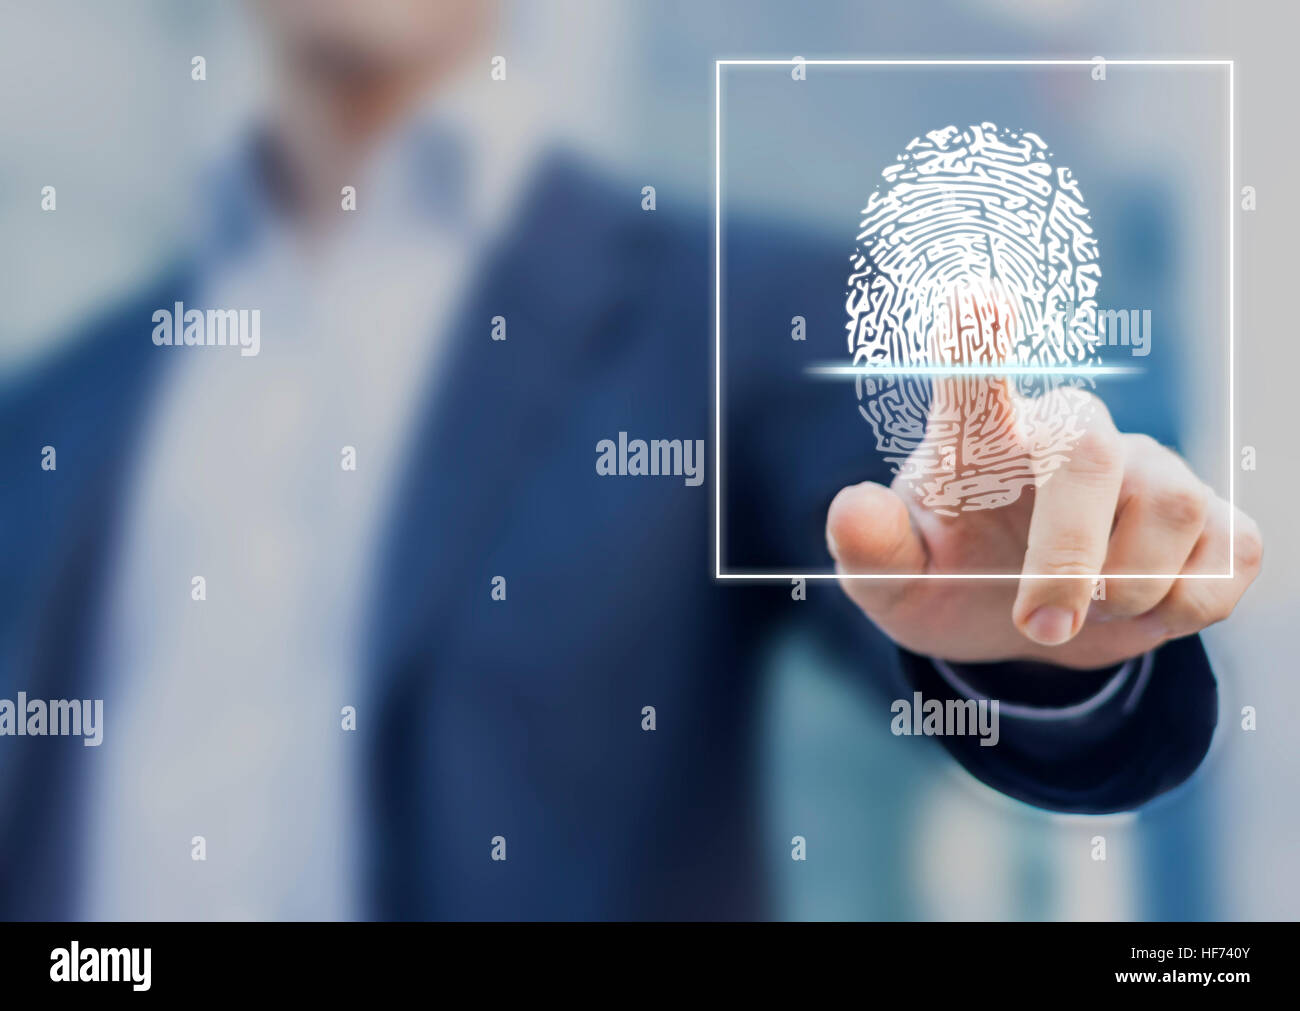 Fingerprint scan provides security access with biometrics identification, person touching screen with finger in background Stock Photo